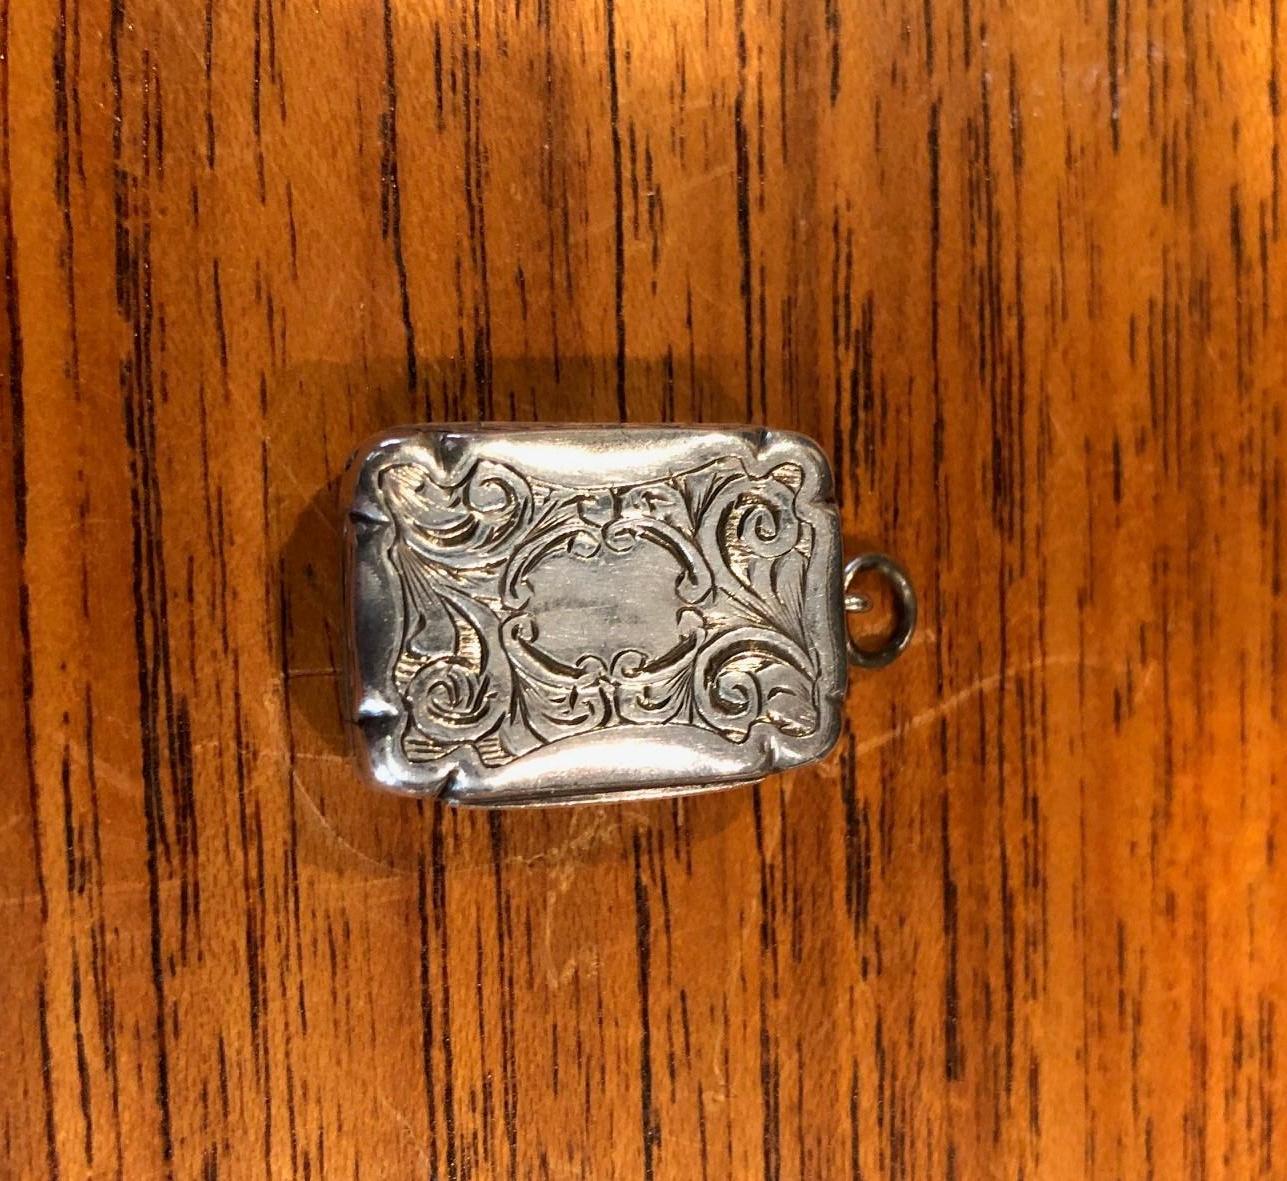 A fine quality Victorian sterling silver miniature vinaigrette by Hilliard & Thomason of Birmingham, England, circa 1963. The piece is of rectangular form with richly engraved top and bottom. The gold gilt interior with finely pierced foliate scroll